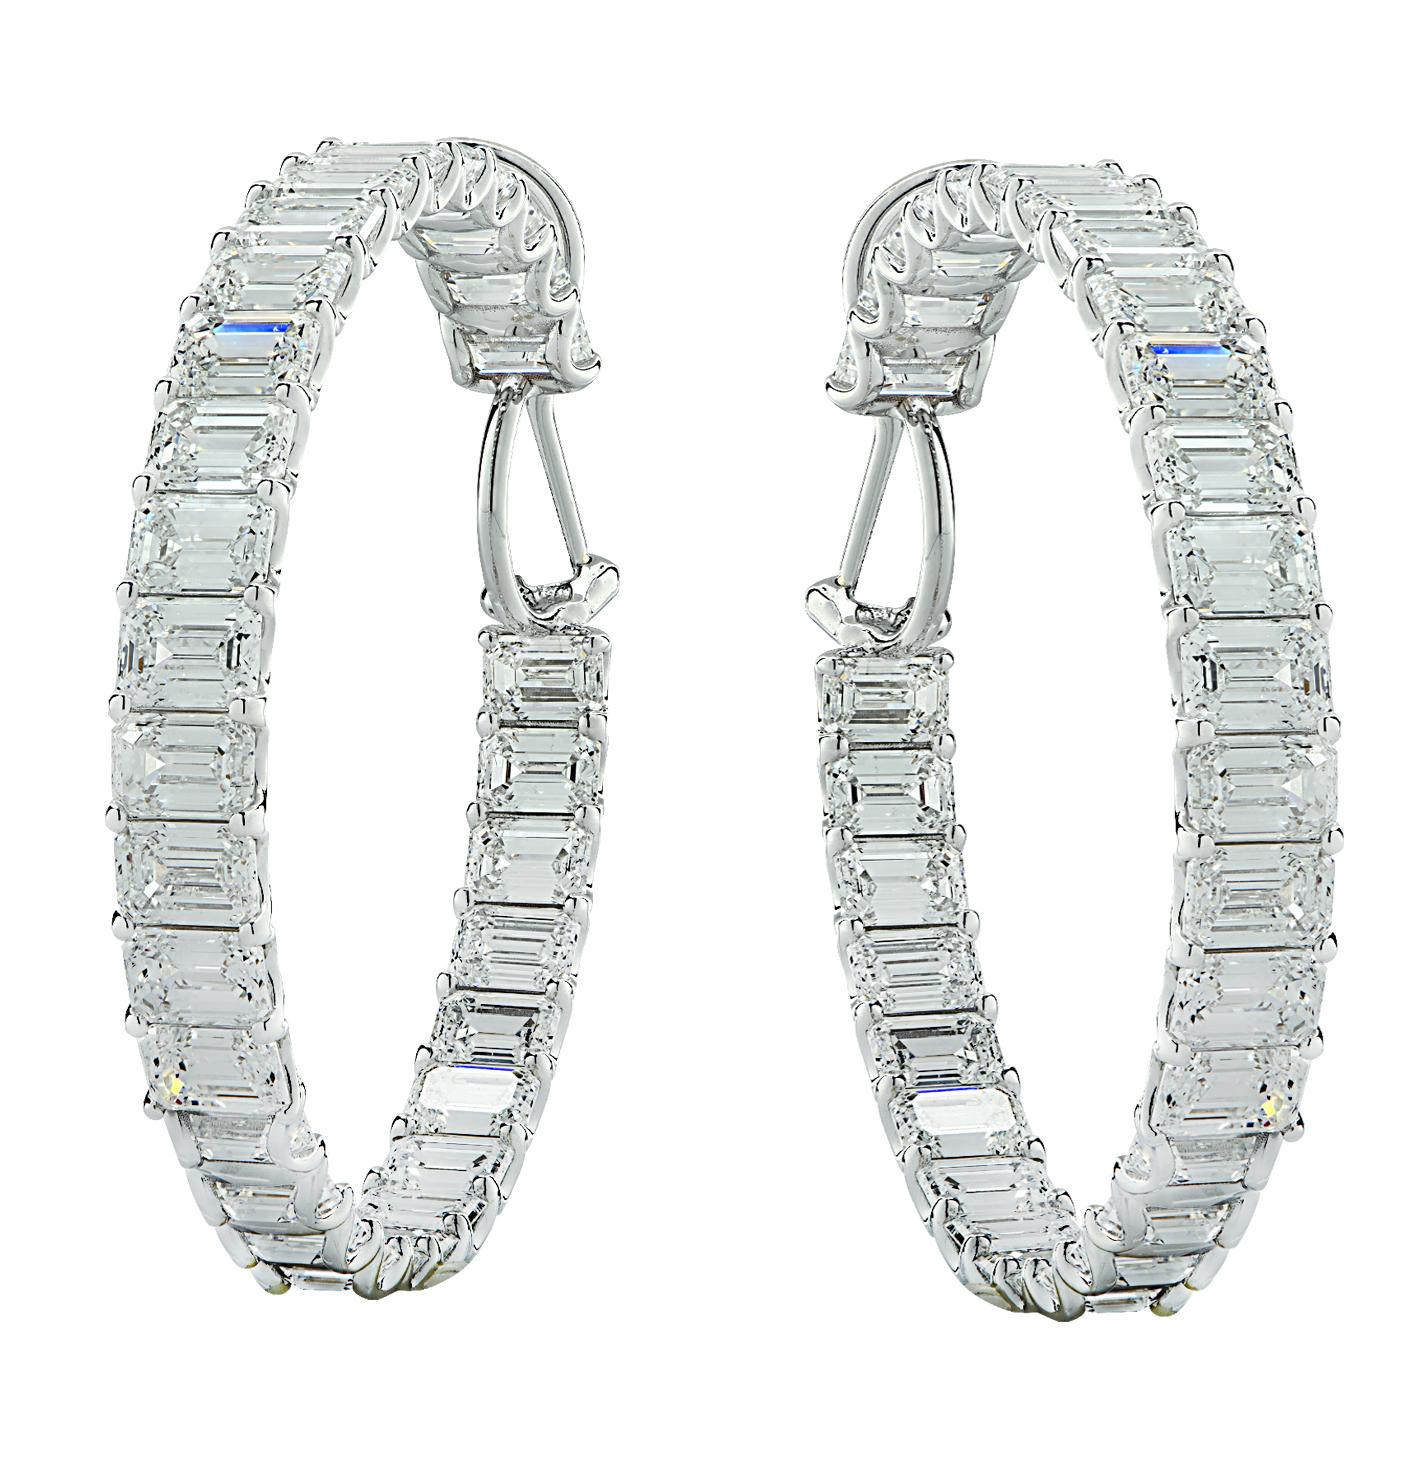 Spectacular in/out round hoop earrings, crafted in platinum, showcasing 62 GIA Certified emerald cut diamonds weighing 29.77 carats total, D-F color, IF-VS2 clarity. The diamonds are set in the inside and outside of the hoops, creating a sensational